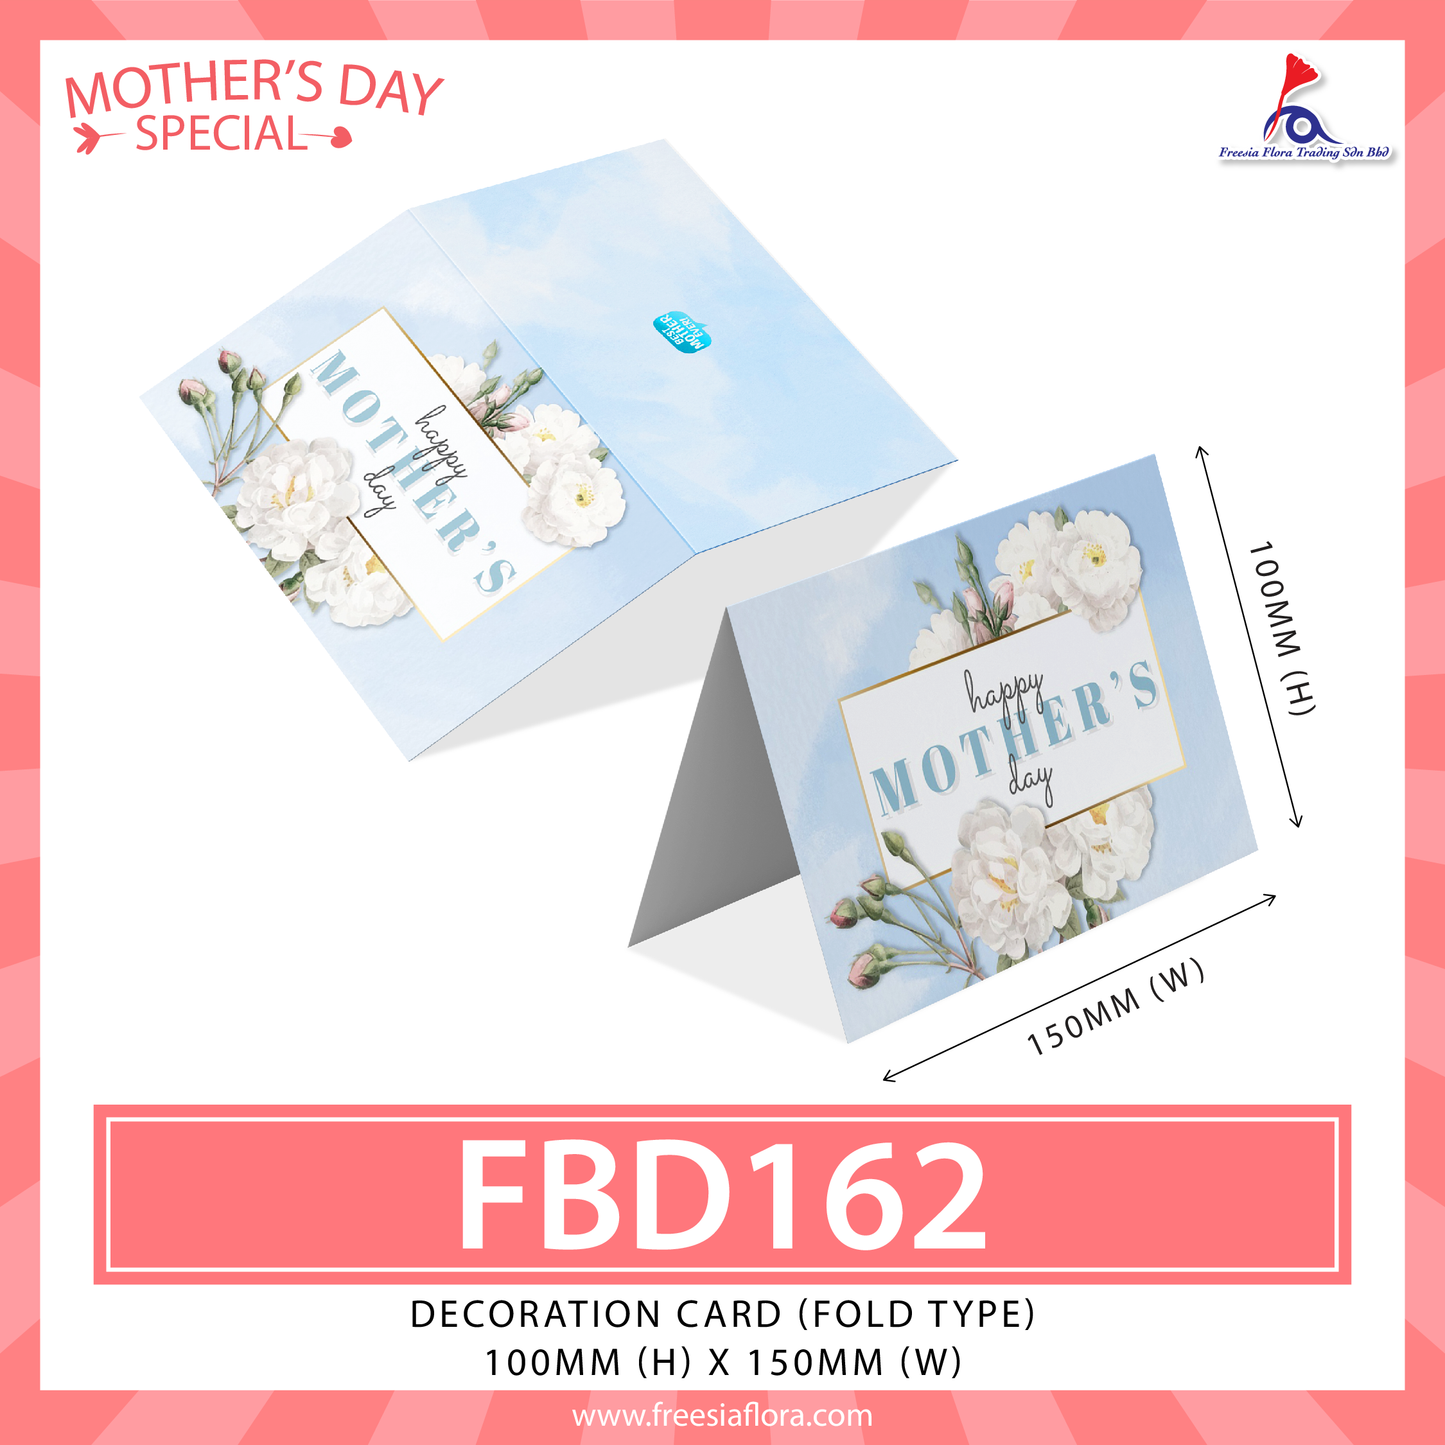 FBD162 Mother's Day Card - HAPPY MOTHER'S DAY (Folded Type)